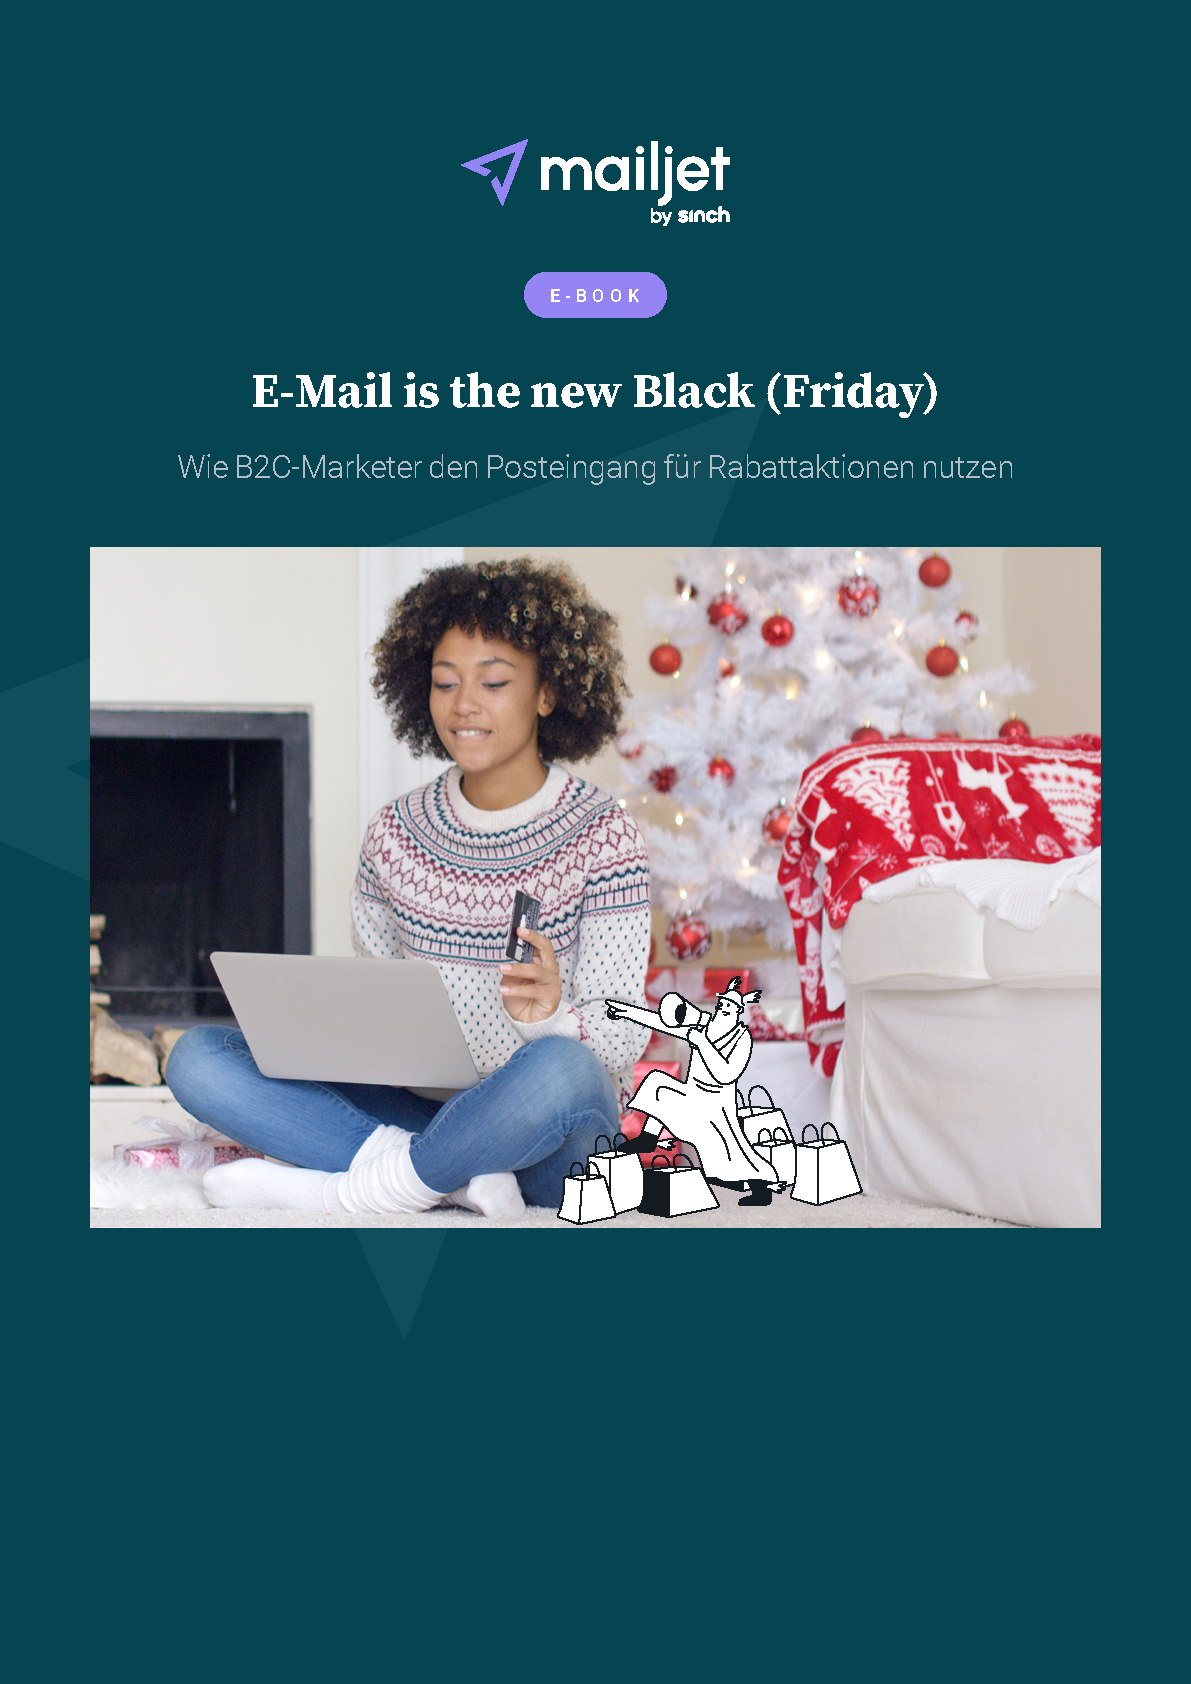 E-Mail is the new Black (Friday)